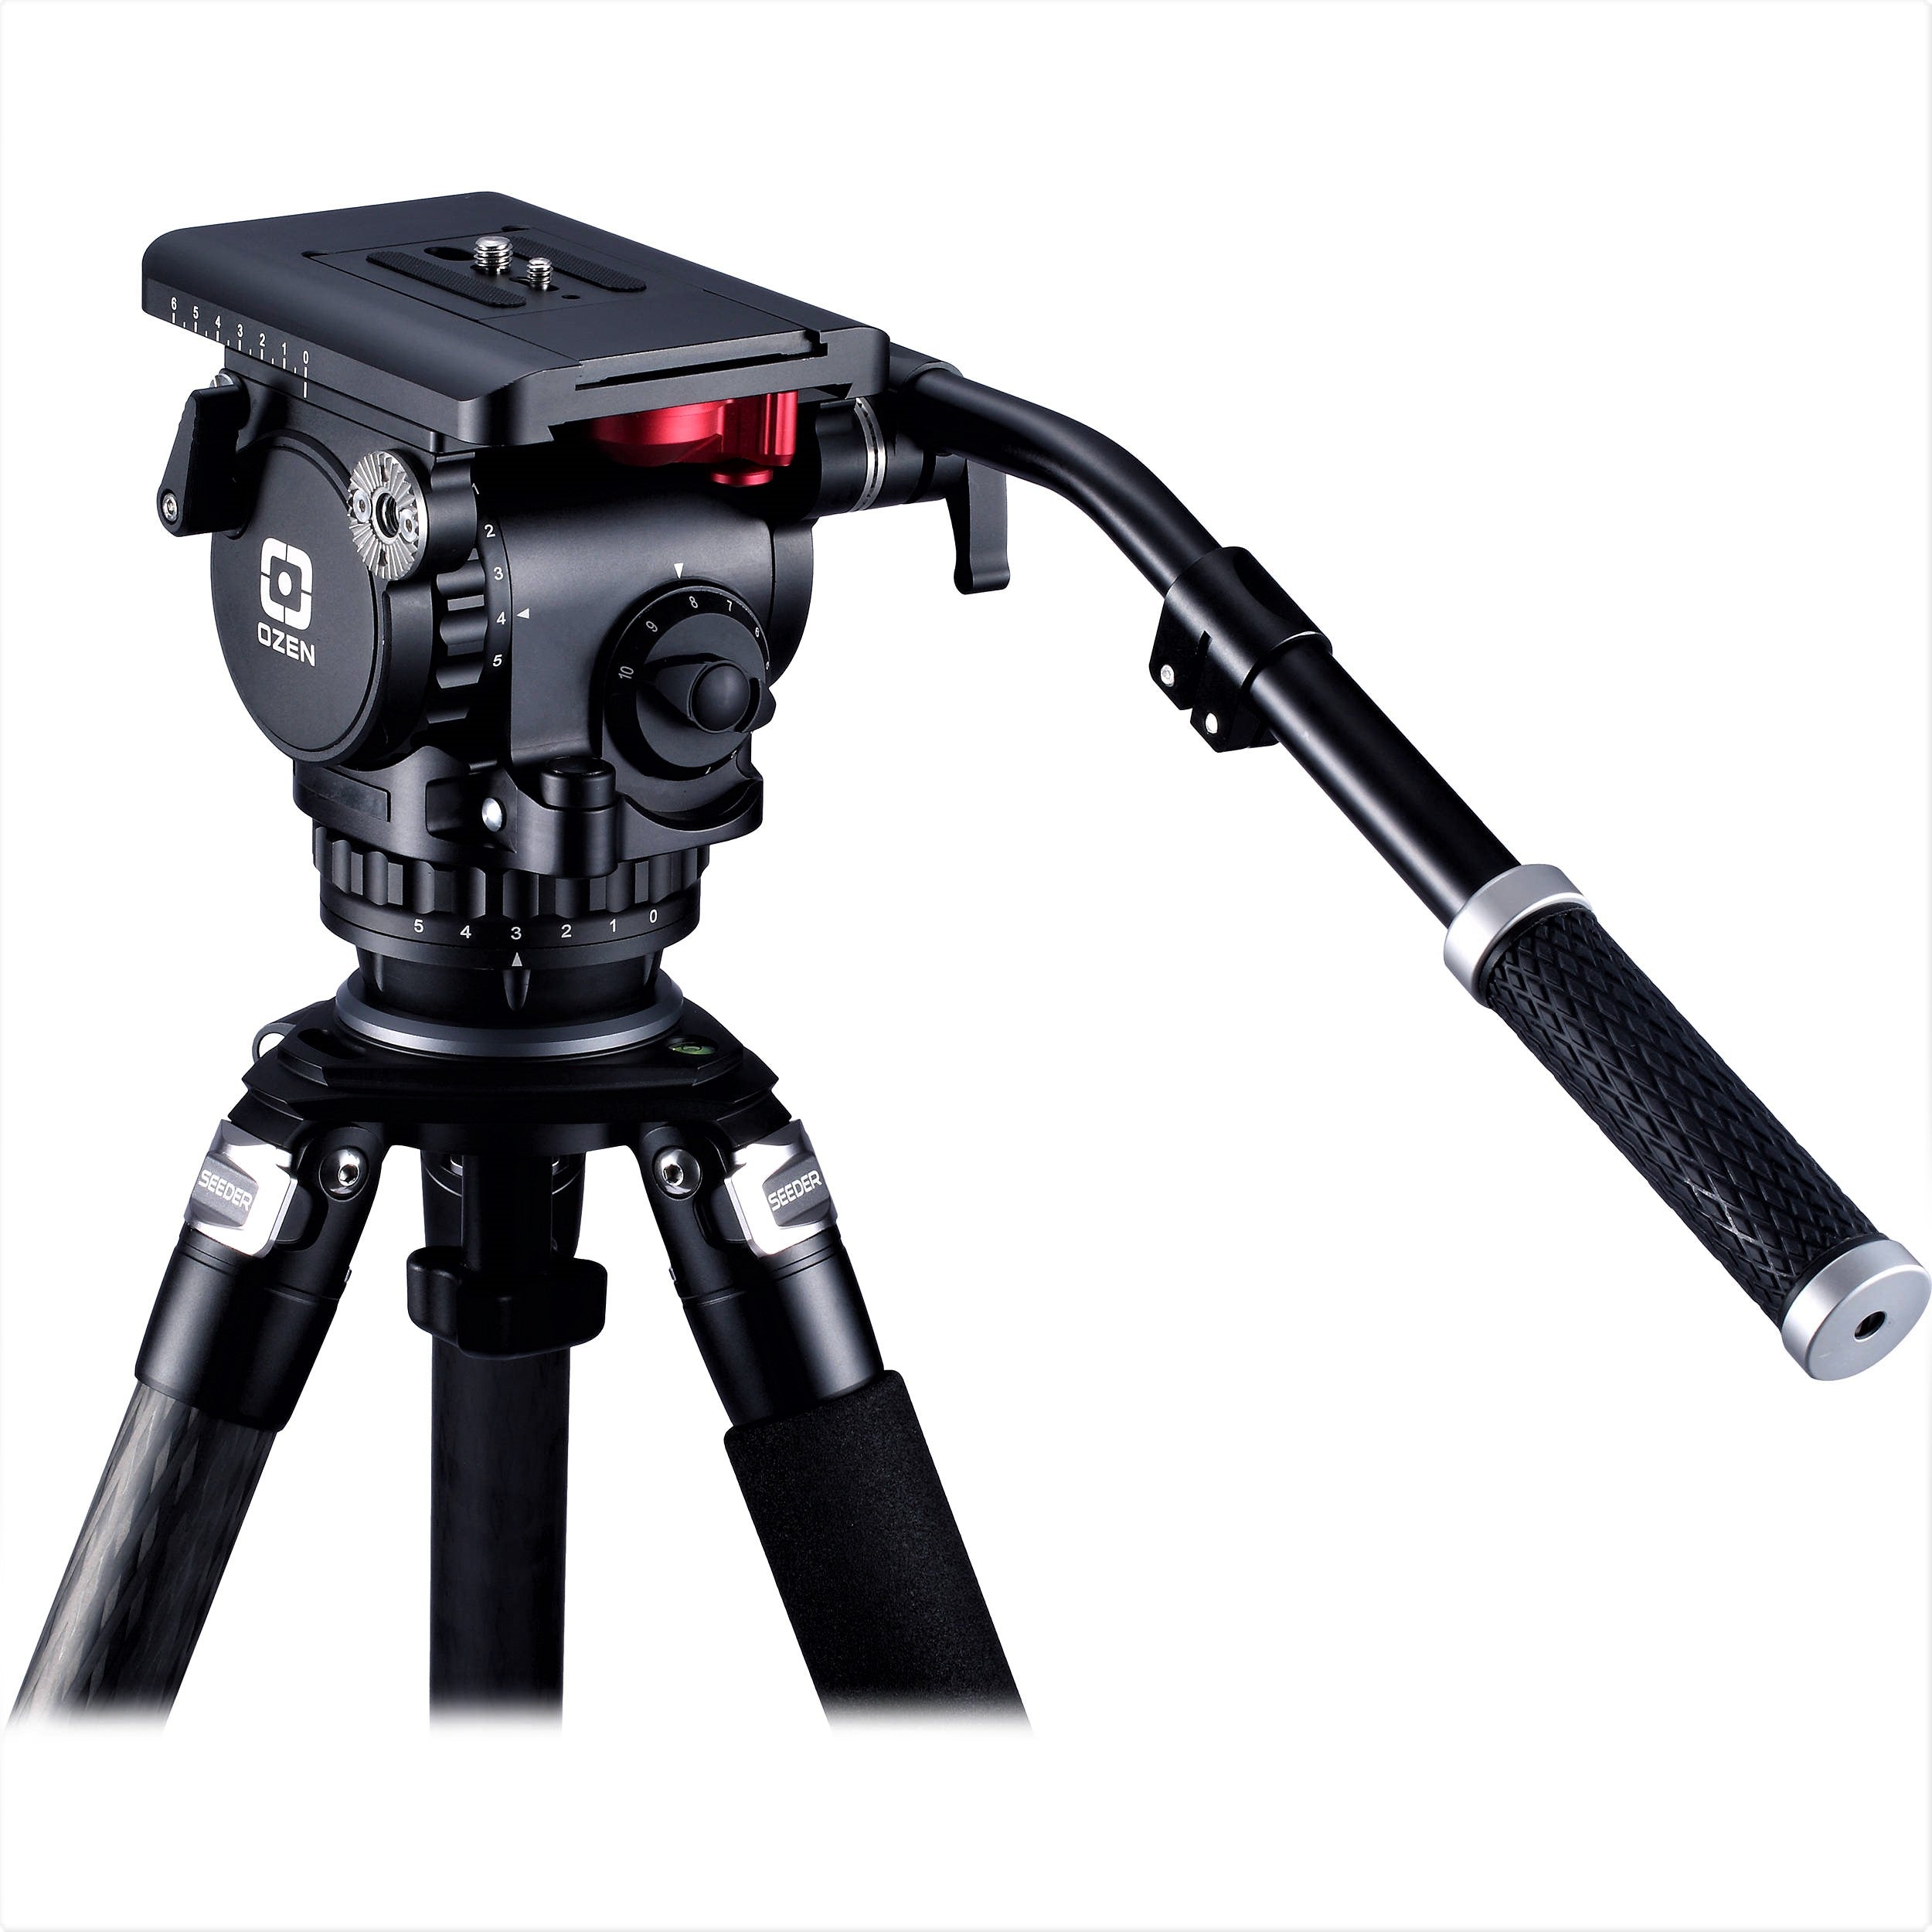 OZEN Agile 8 Fluid Head with Attached Tripod (Front-Side View)